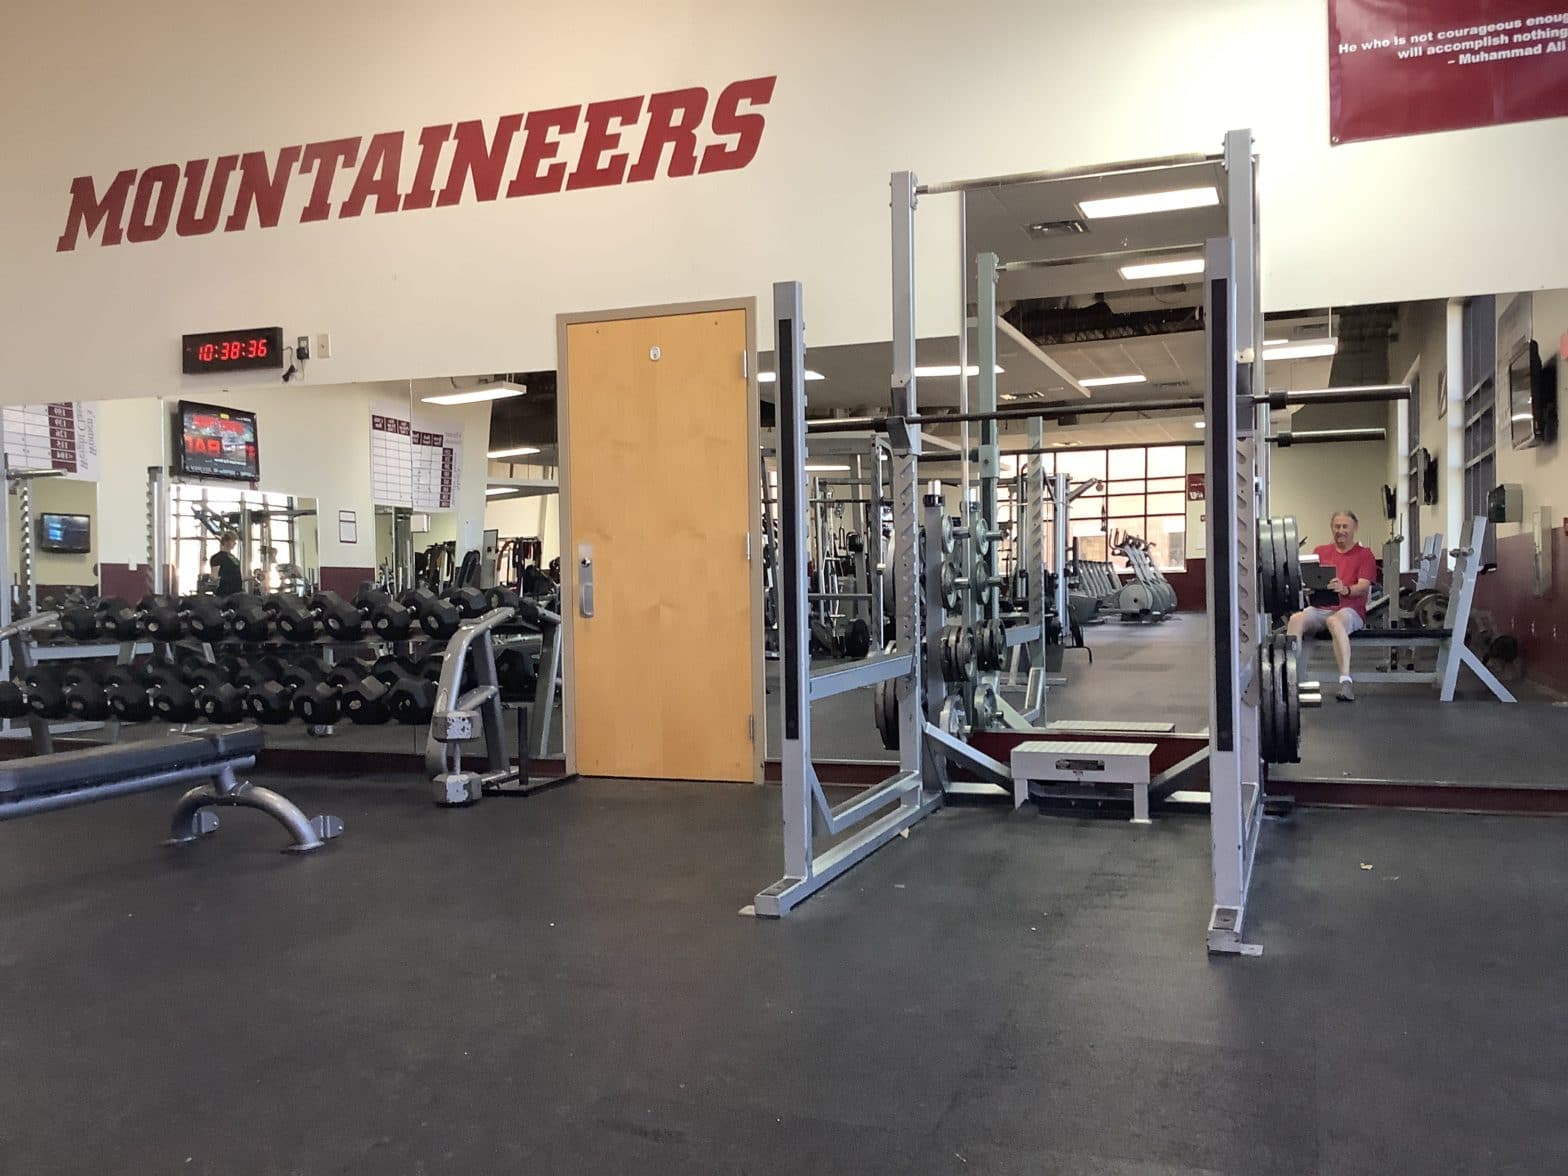 Mountaineers Fitness Center for Healthy Aging